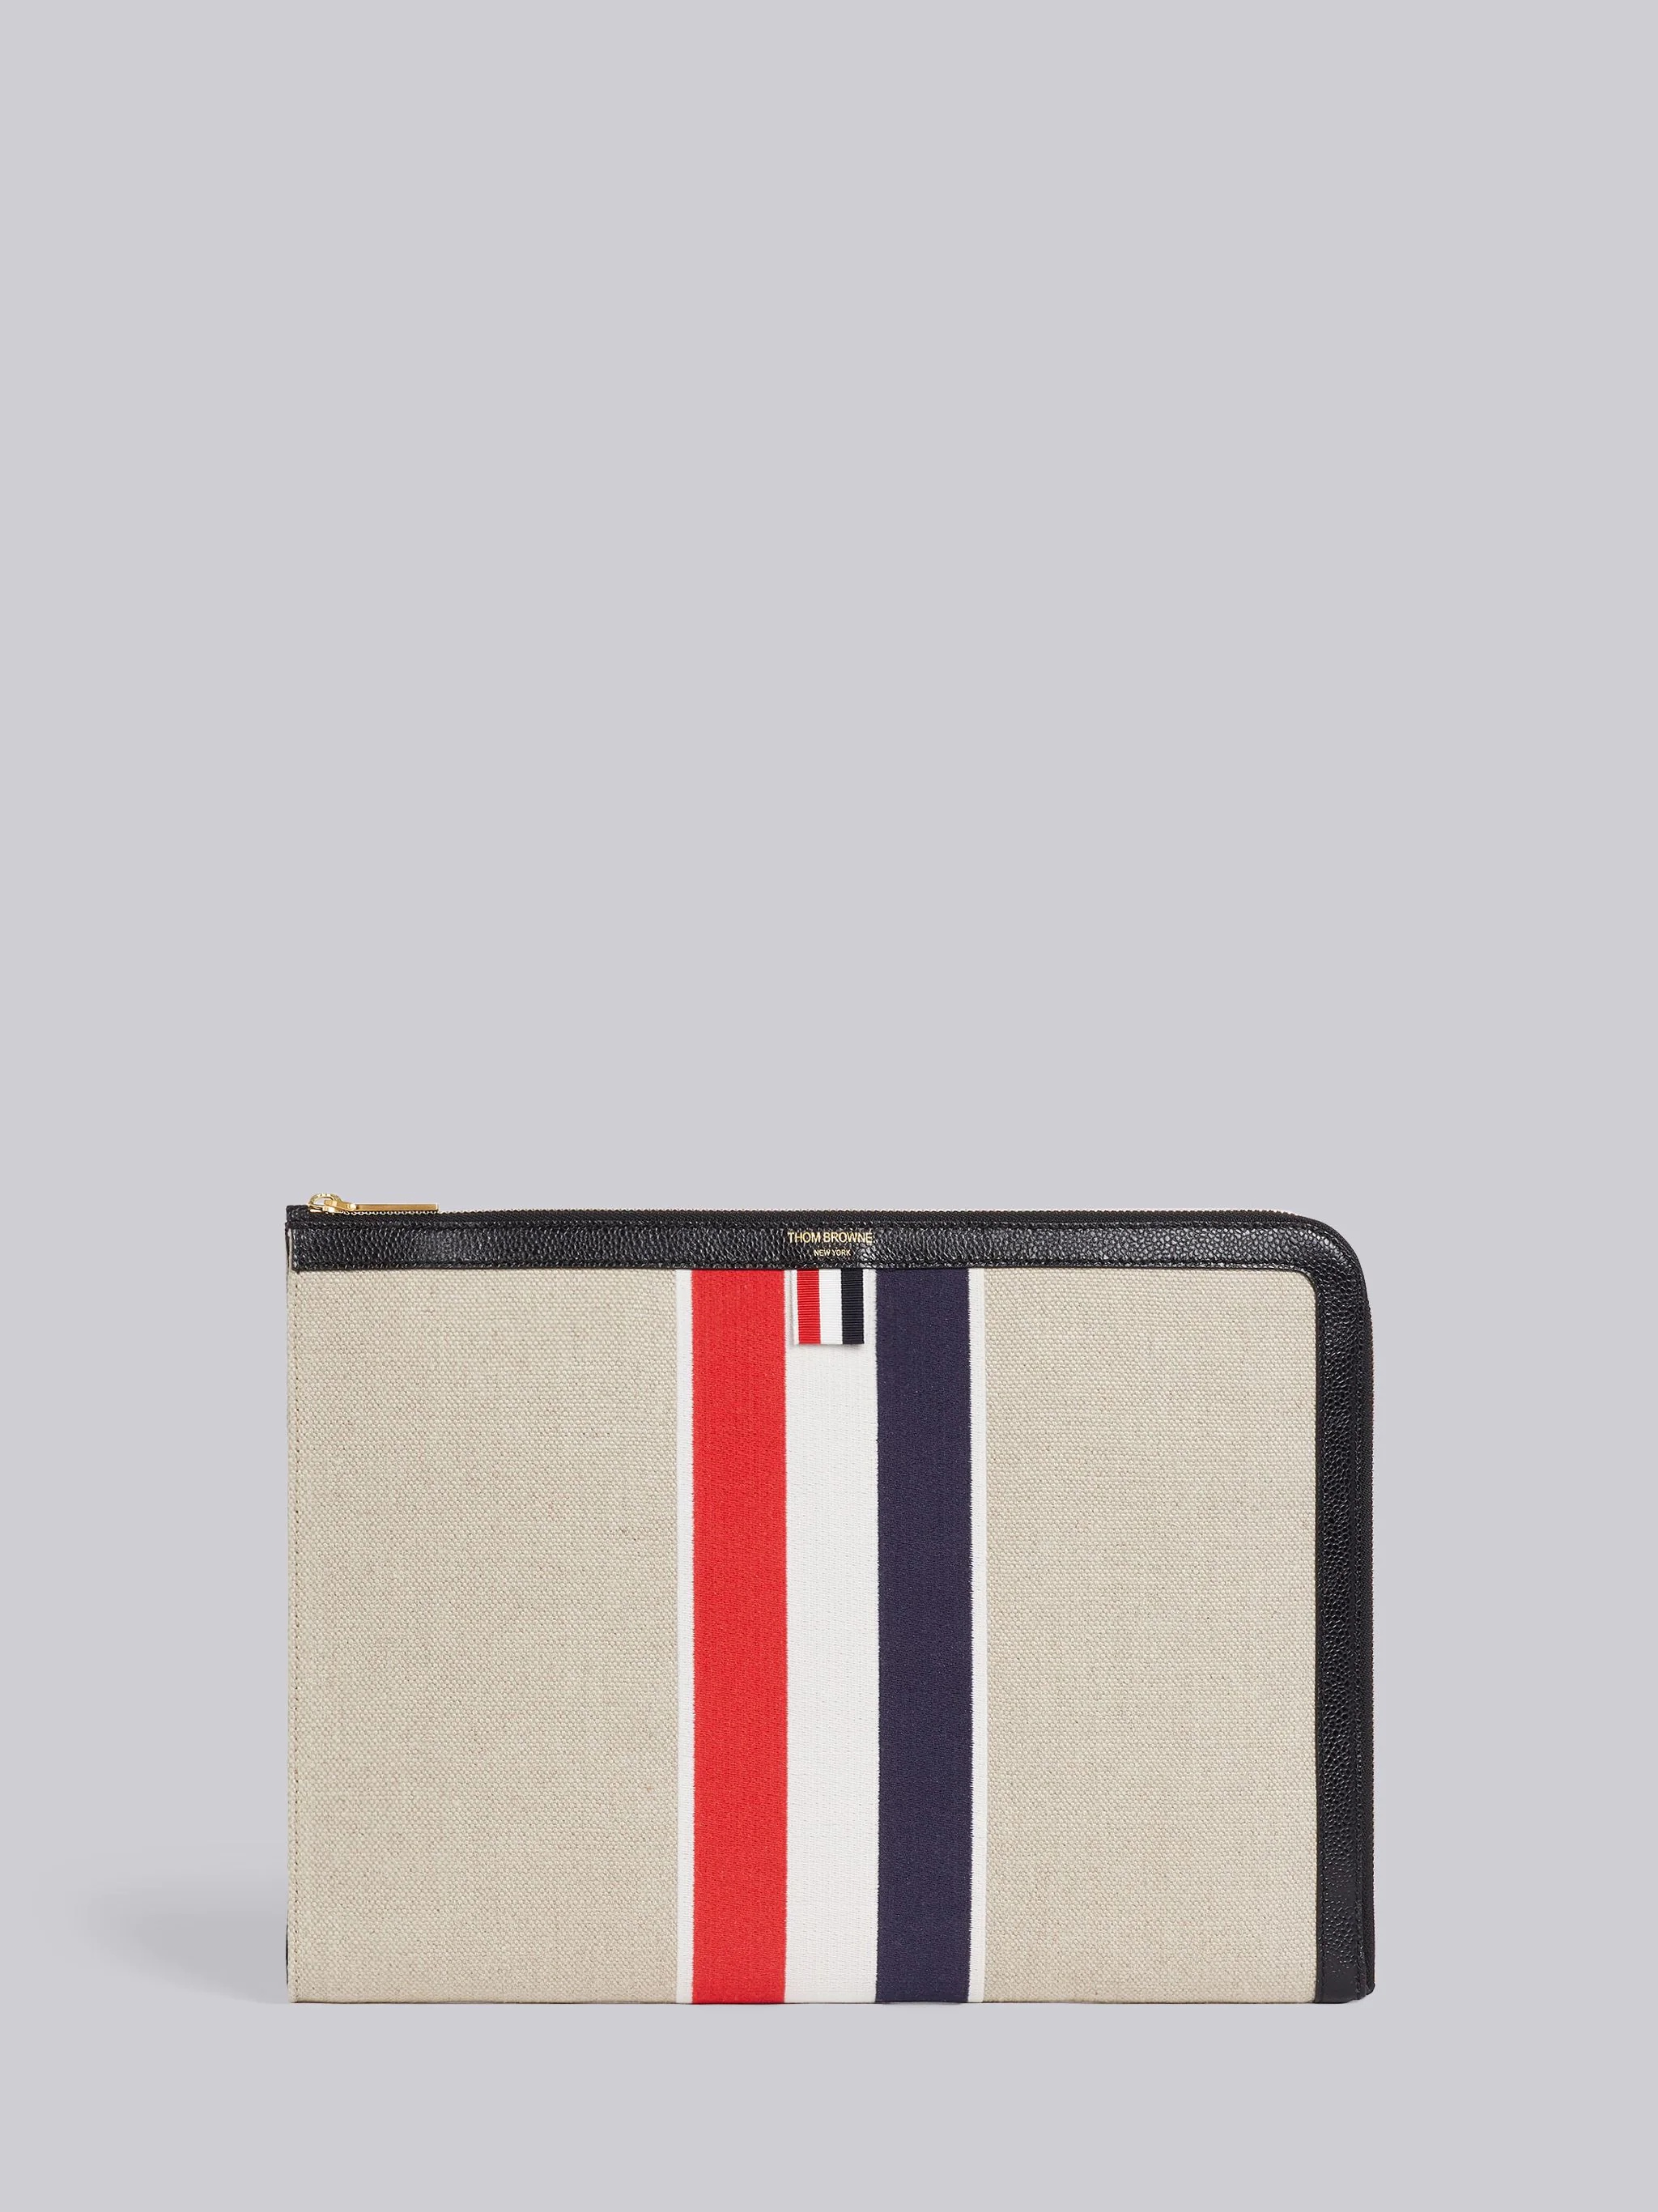 Natural Military Canvas Striped Gusset Folio - 1